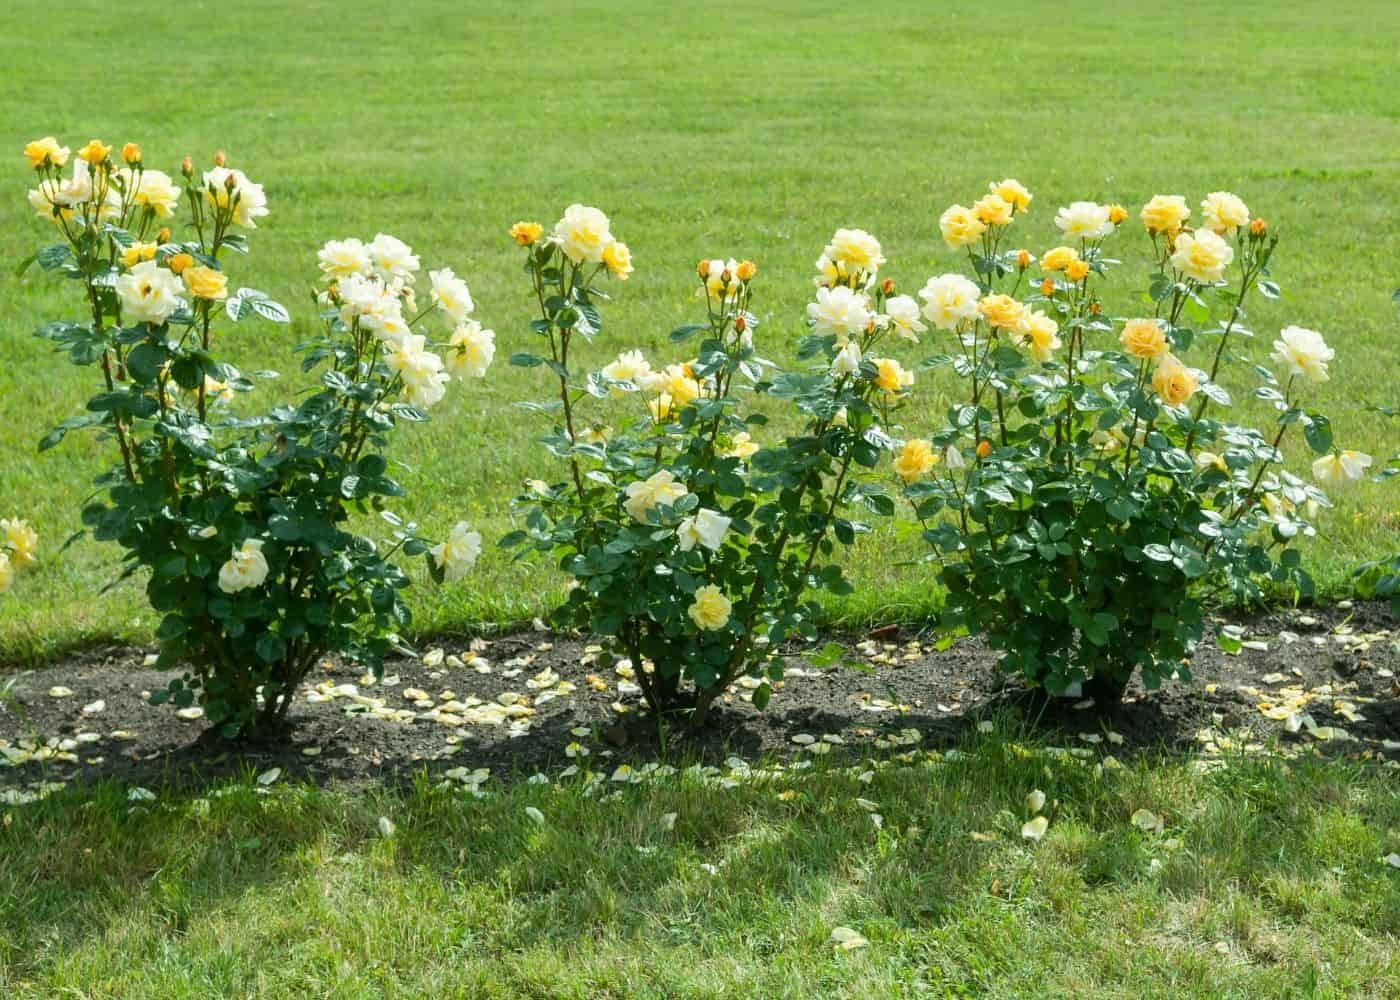 How to care for roses - mulching